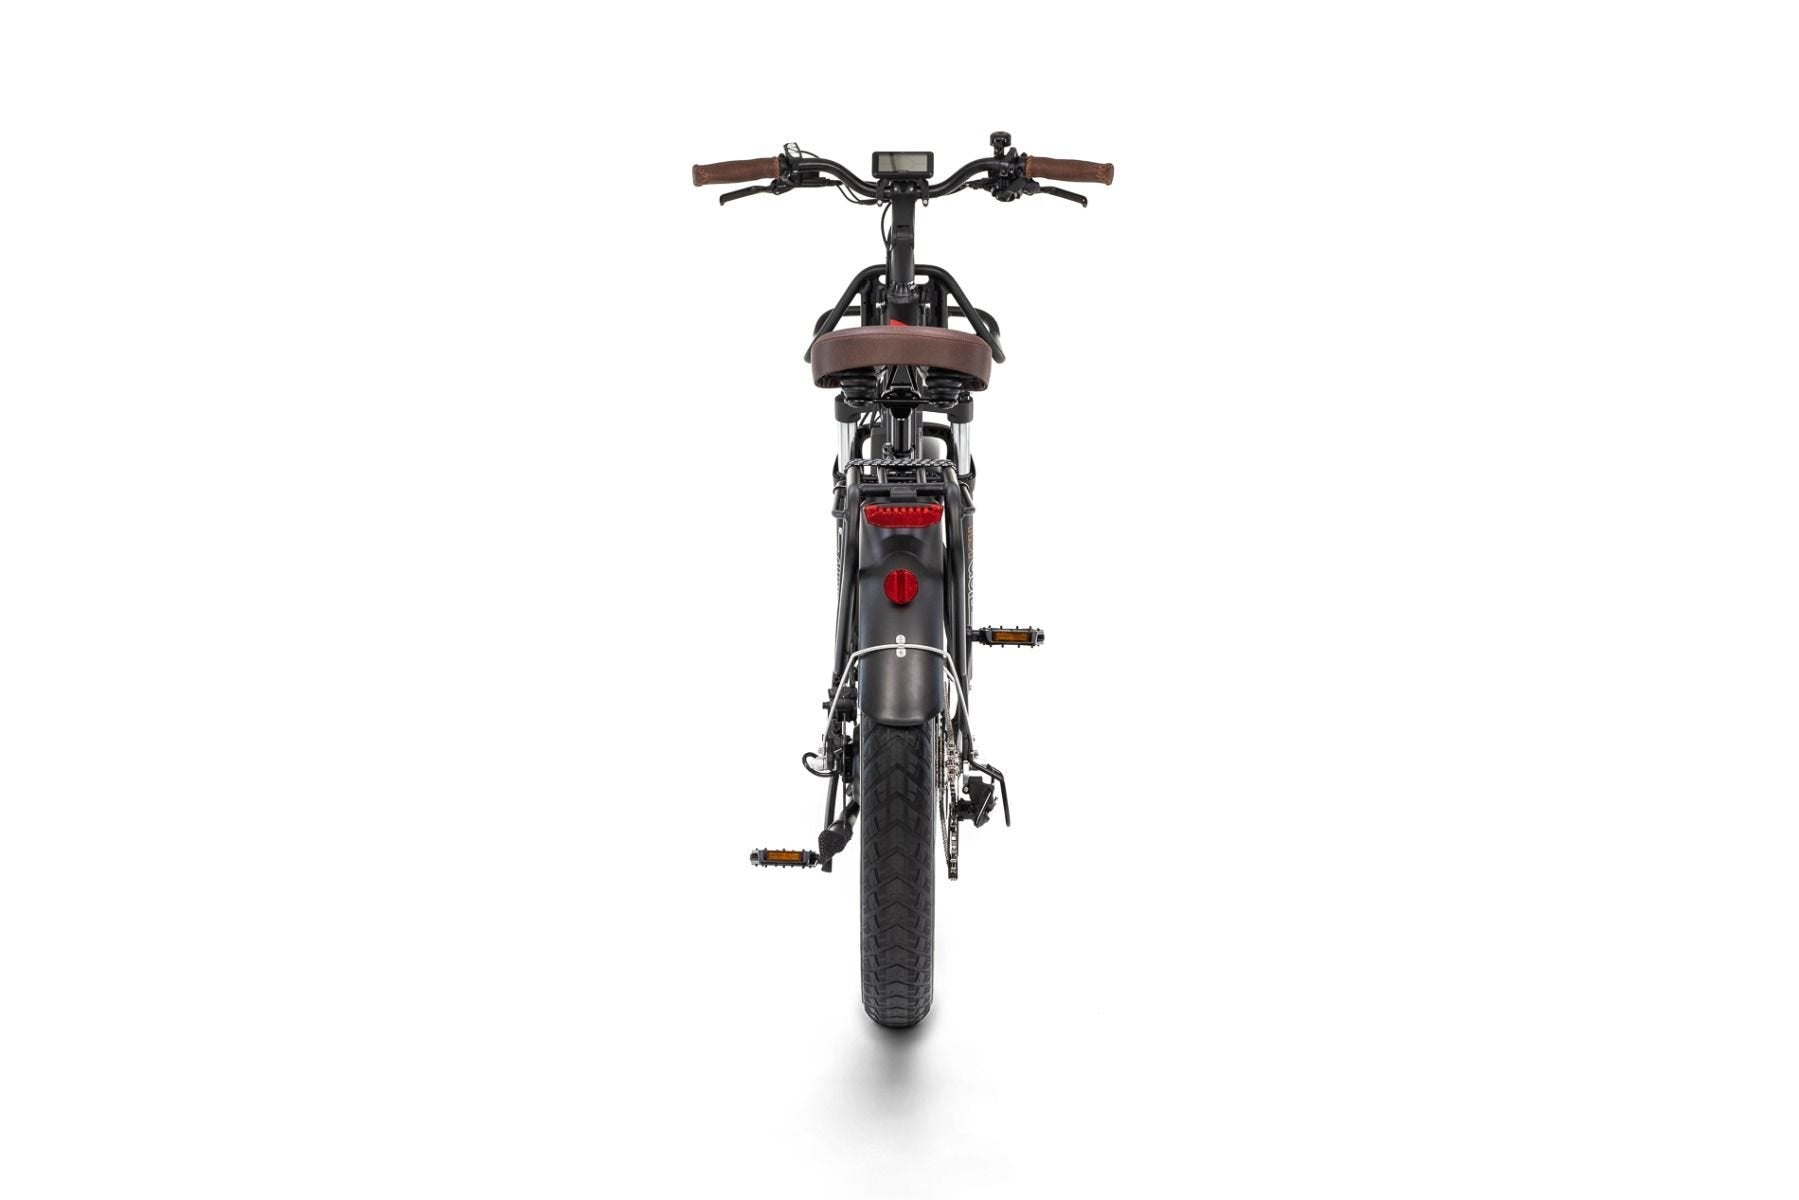 ET Cycle T1000 Electric Fat Tire Bike